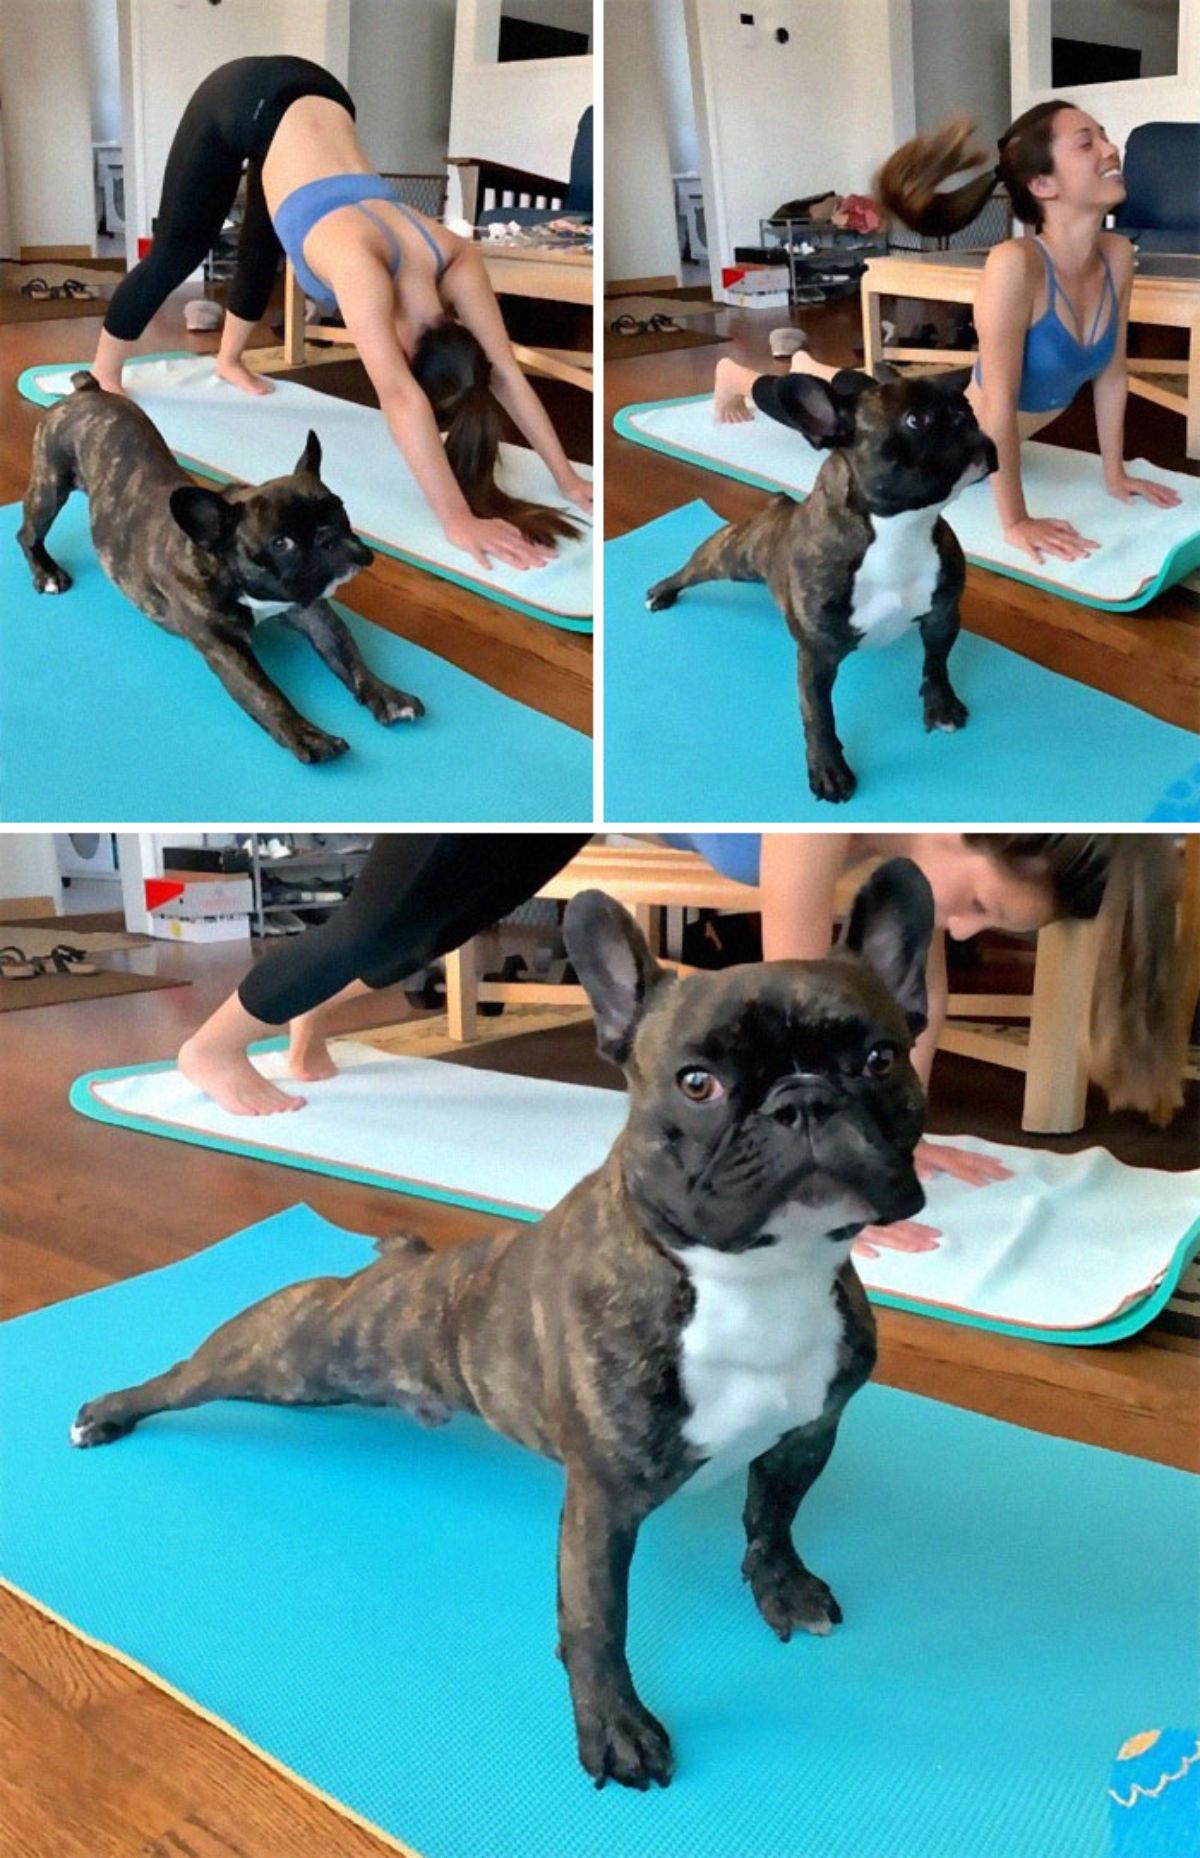 3 photos of a black brown and white french bulldog on a blue yoga mat next to a woman on a white yoga mat and the dog is copying the woman's yoga poses